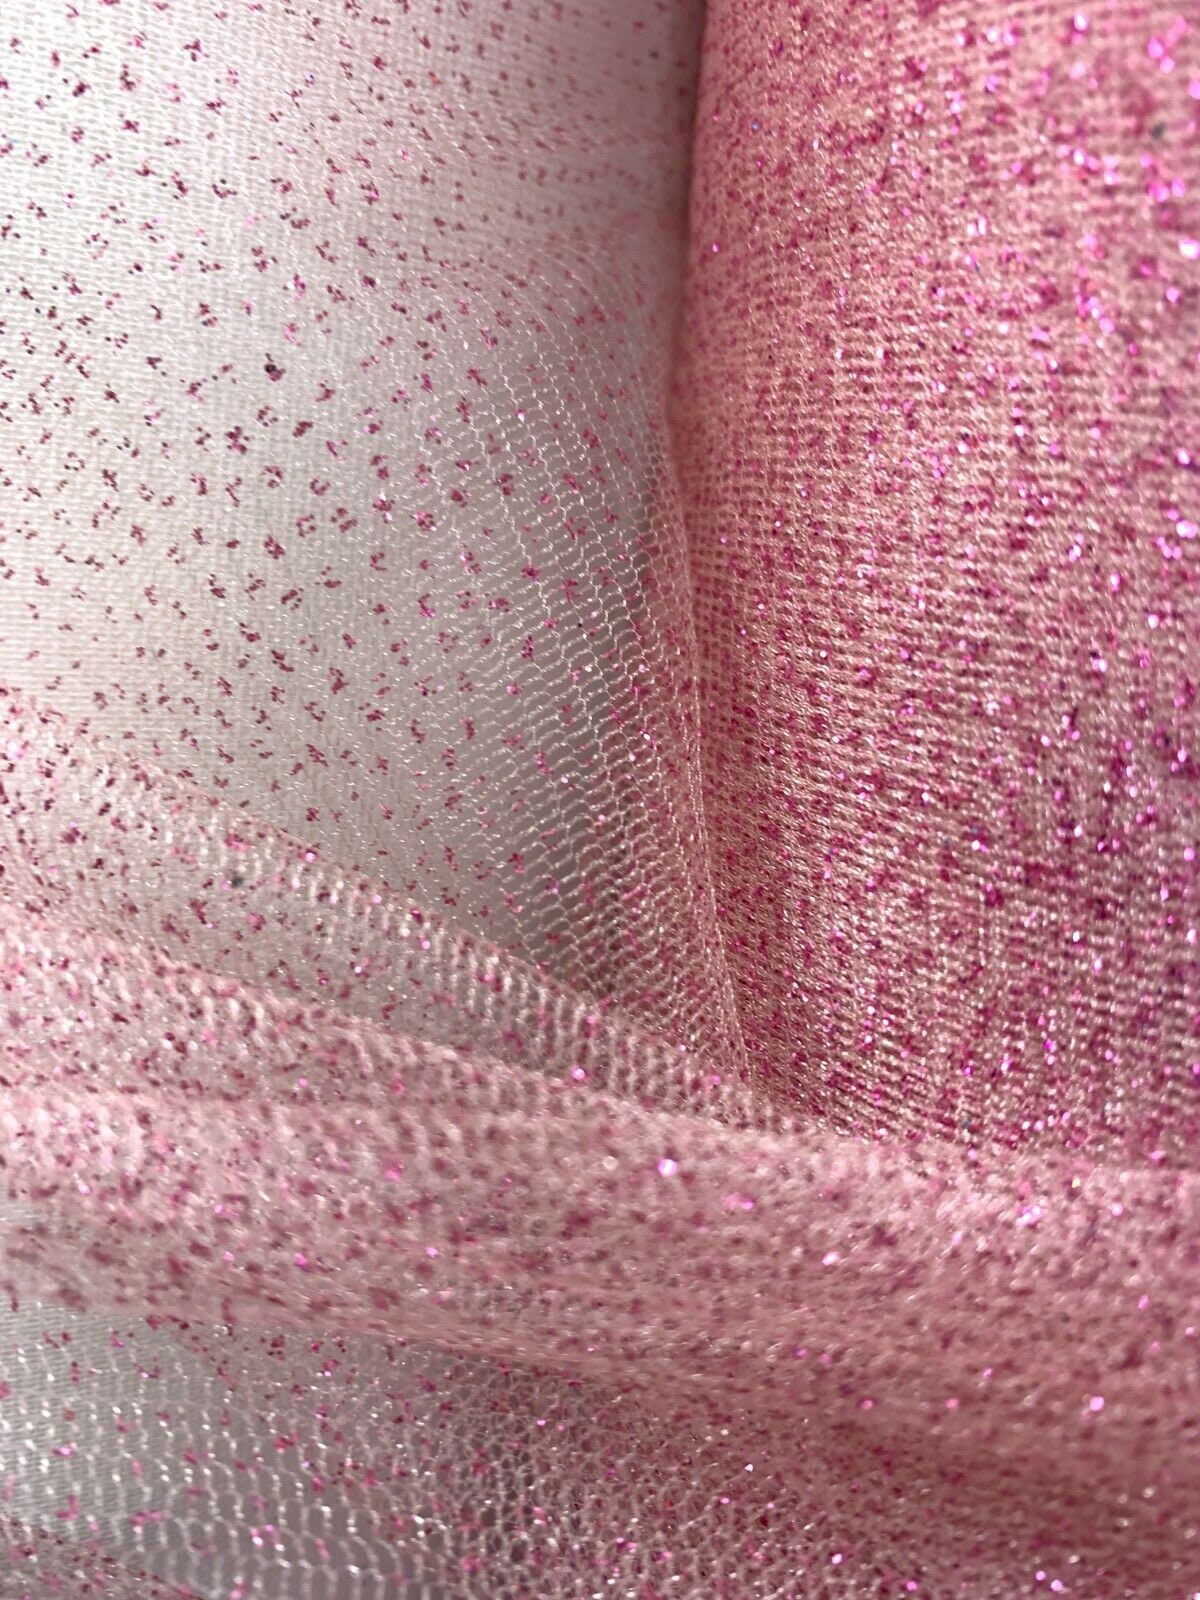 ROSE PINK Sparkle Glitter Tulle Decoration Event Fabric (60 in.) Sold By The Yard